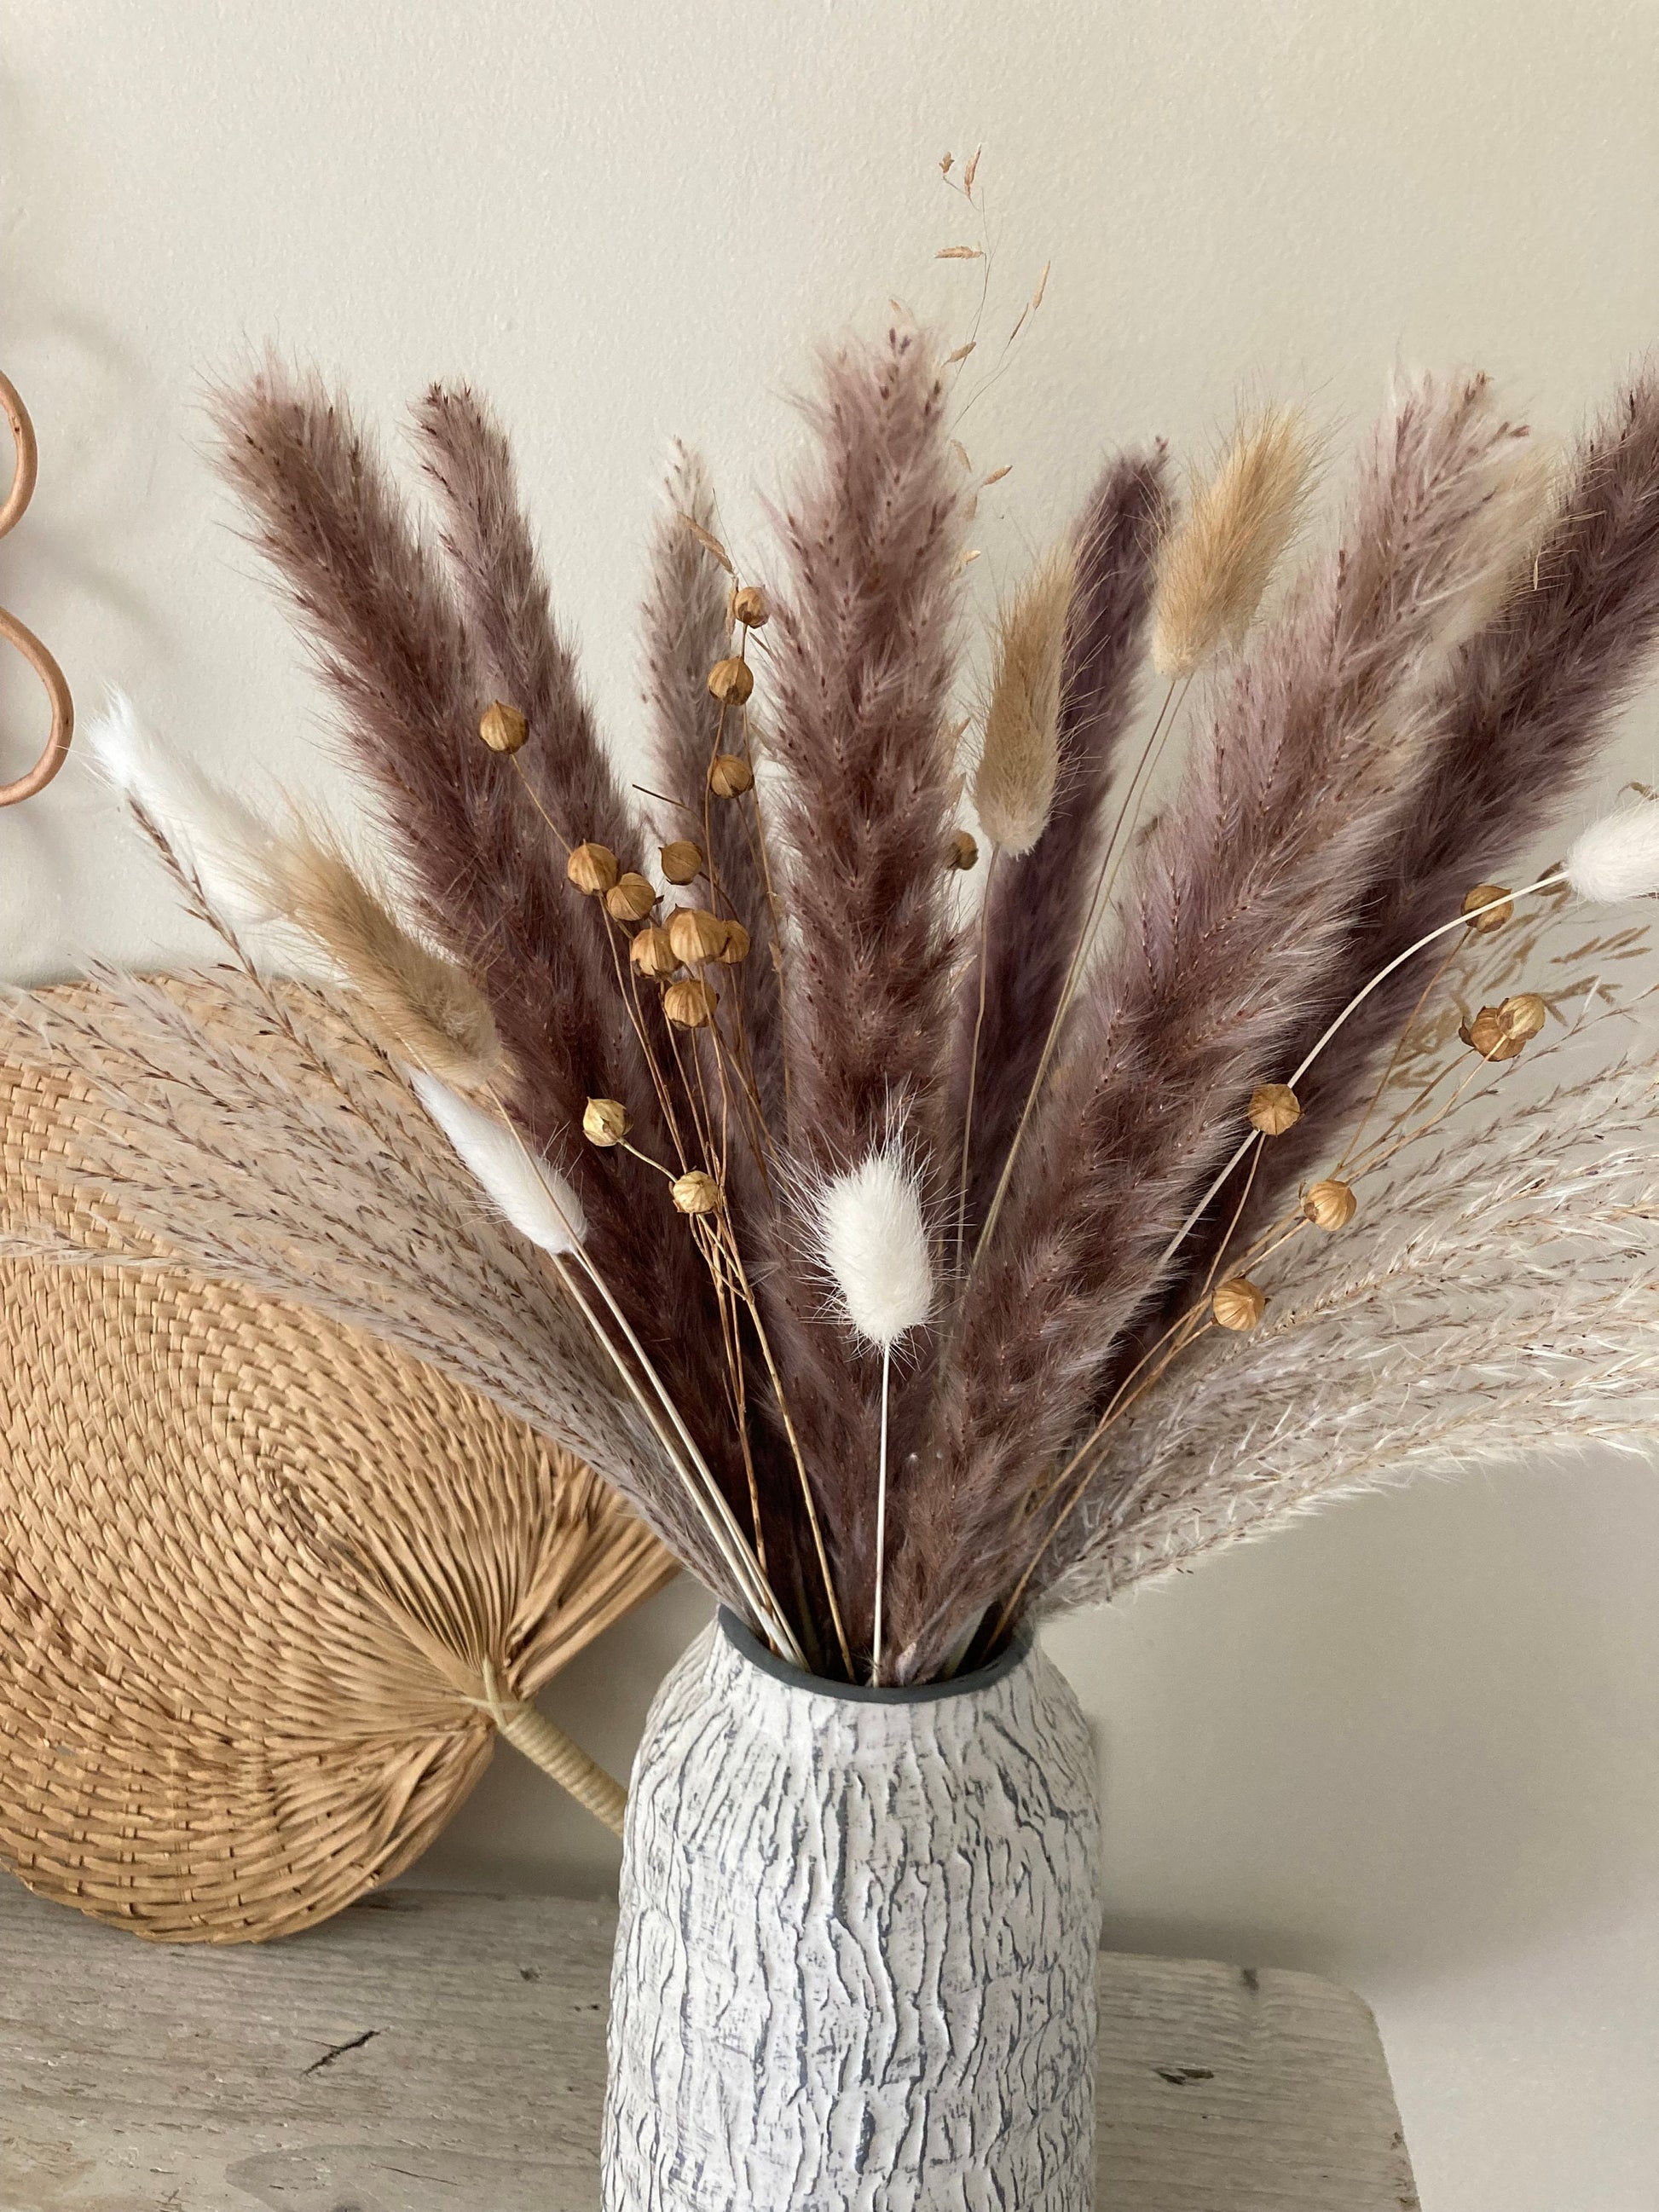 Letterbox Natural Dried Flowers and Pampas Grass - 45cm – Norfolk Pampas